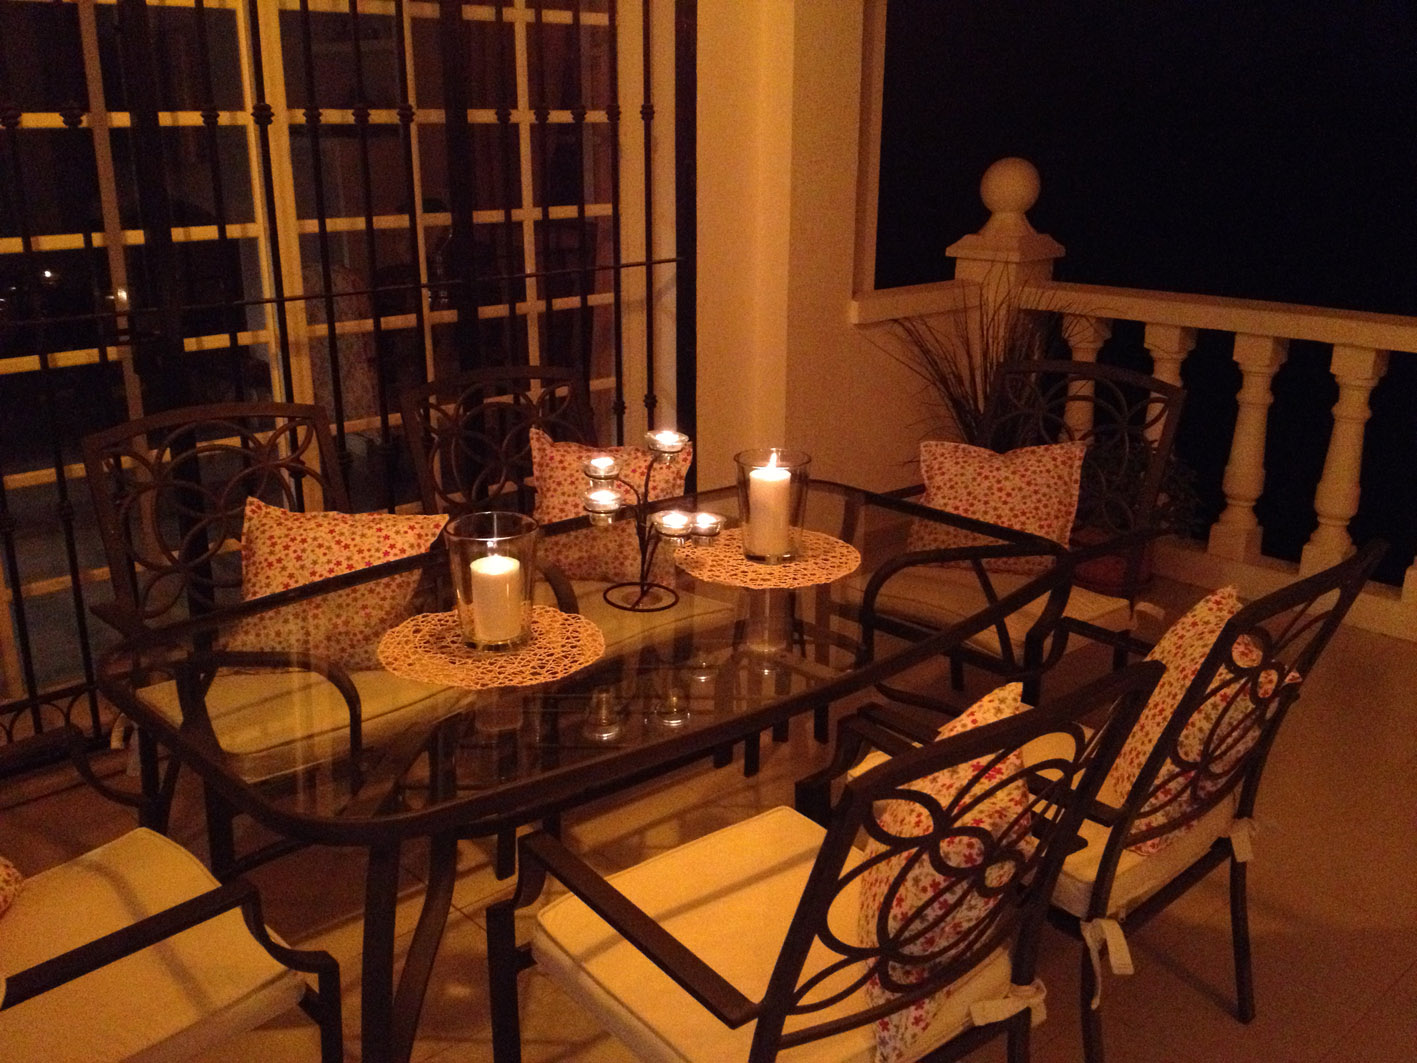 nighttime on the terrace